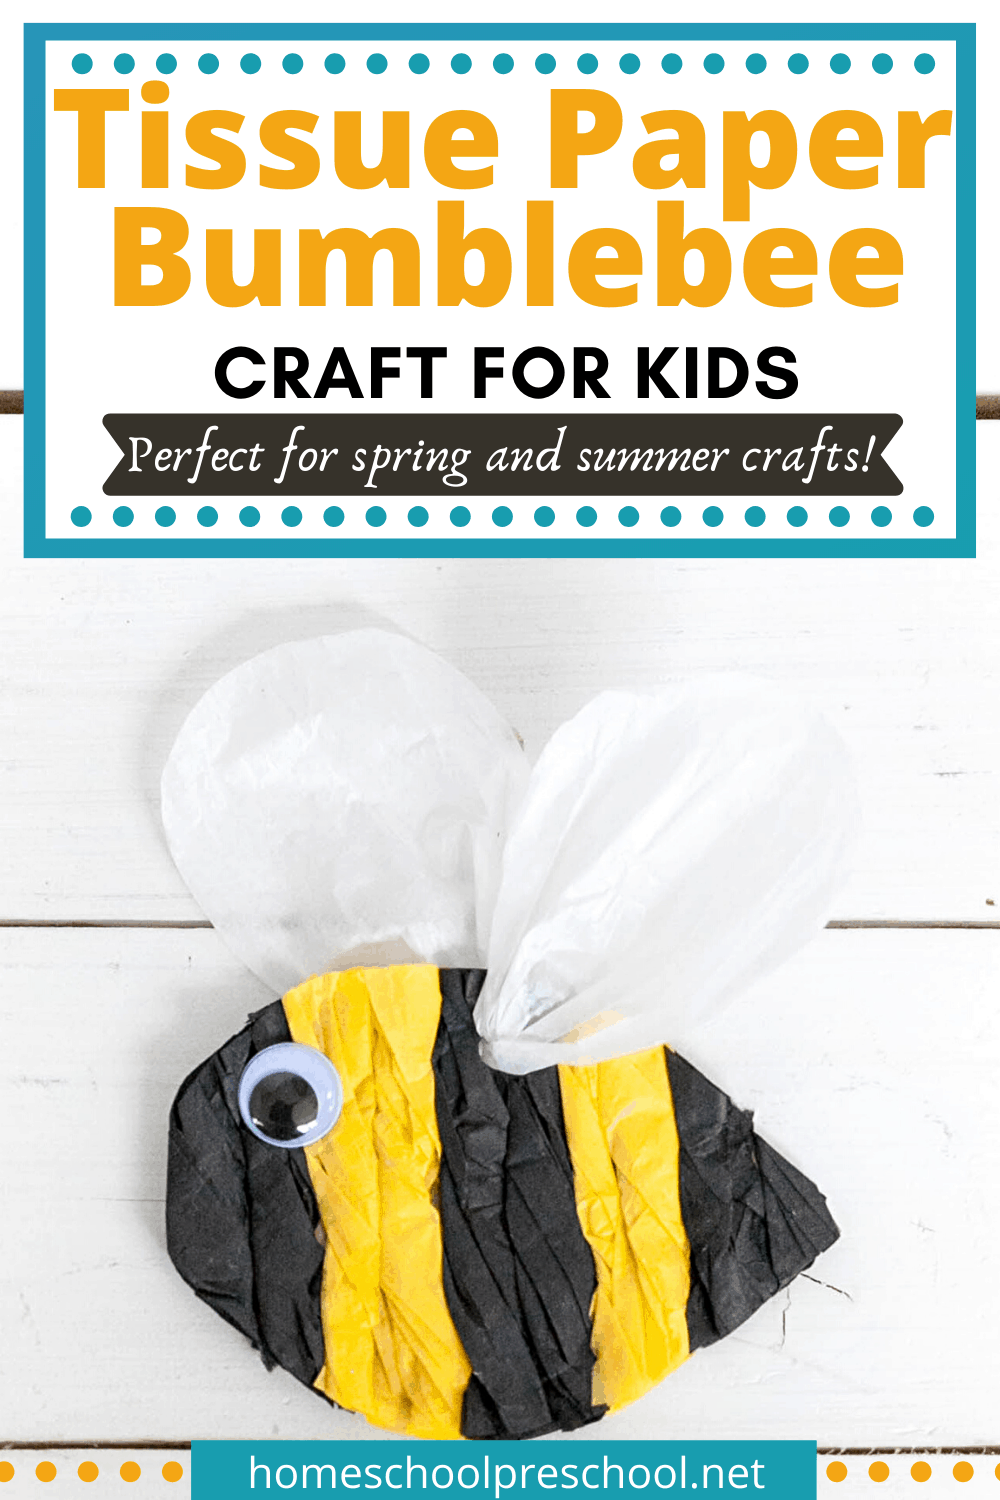 These tissue paper bees are so cute, and they're great for helping preschoolers polish fine motor skills. Add them to your spring and summer craft list.